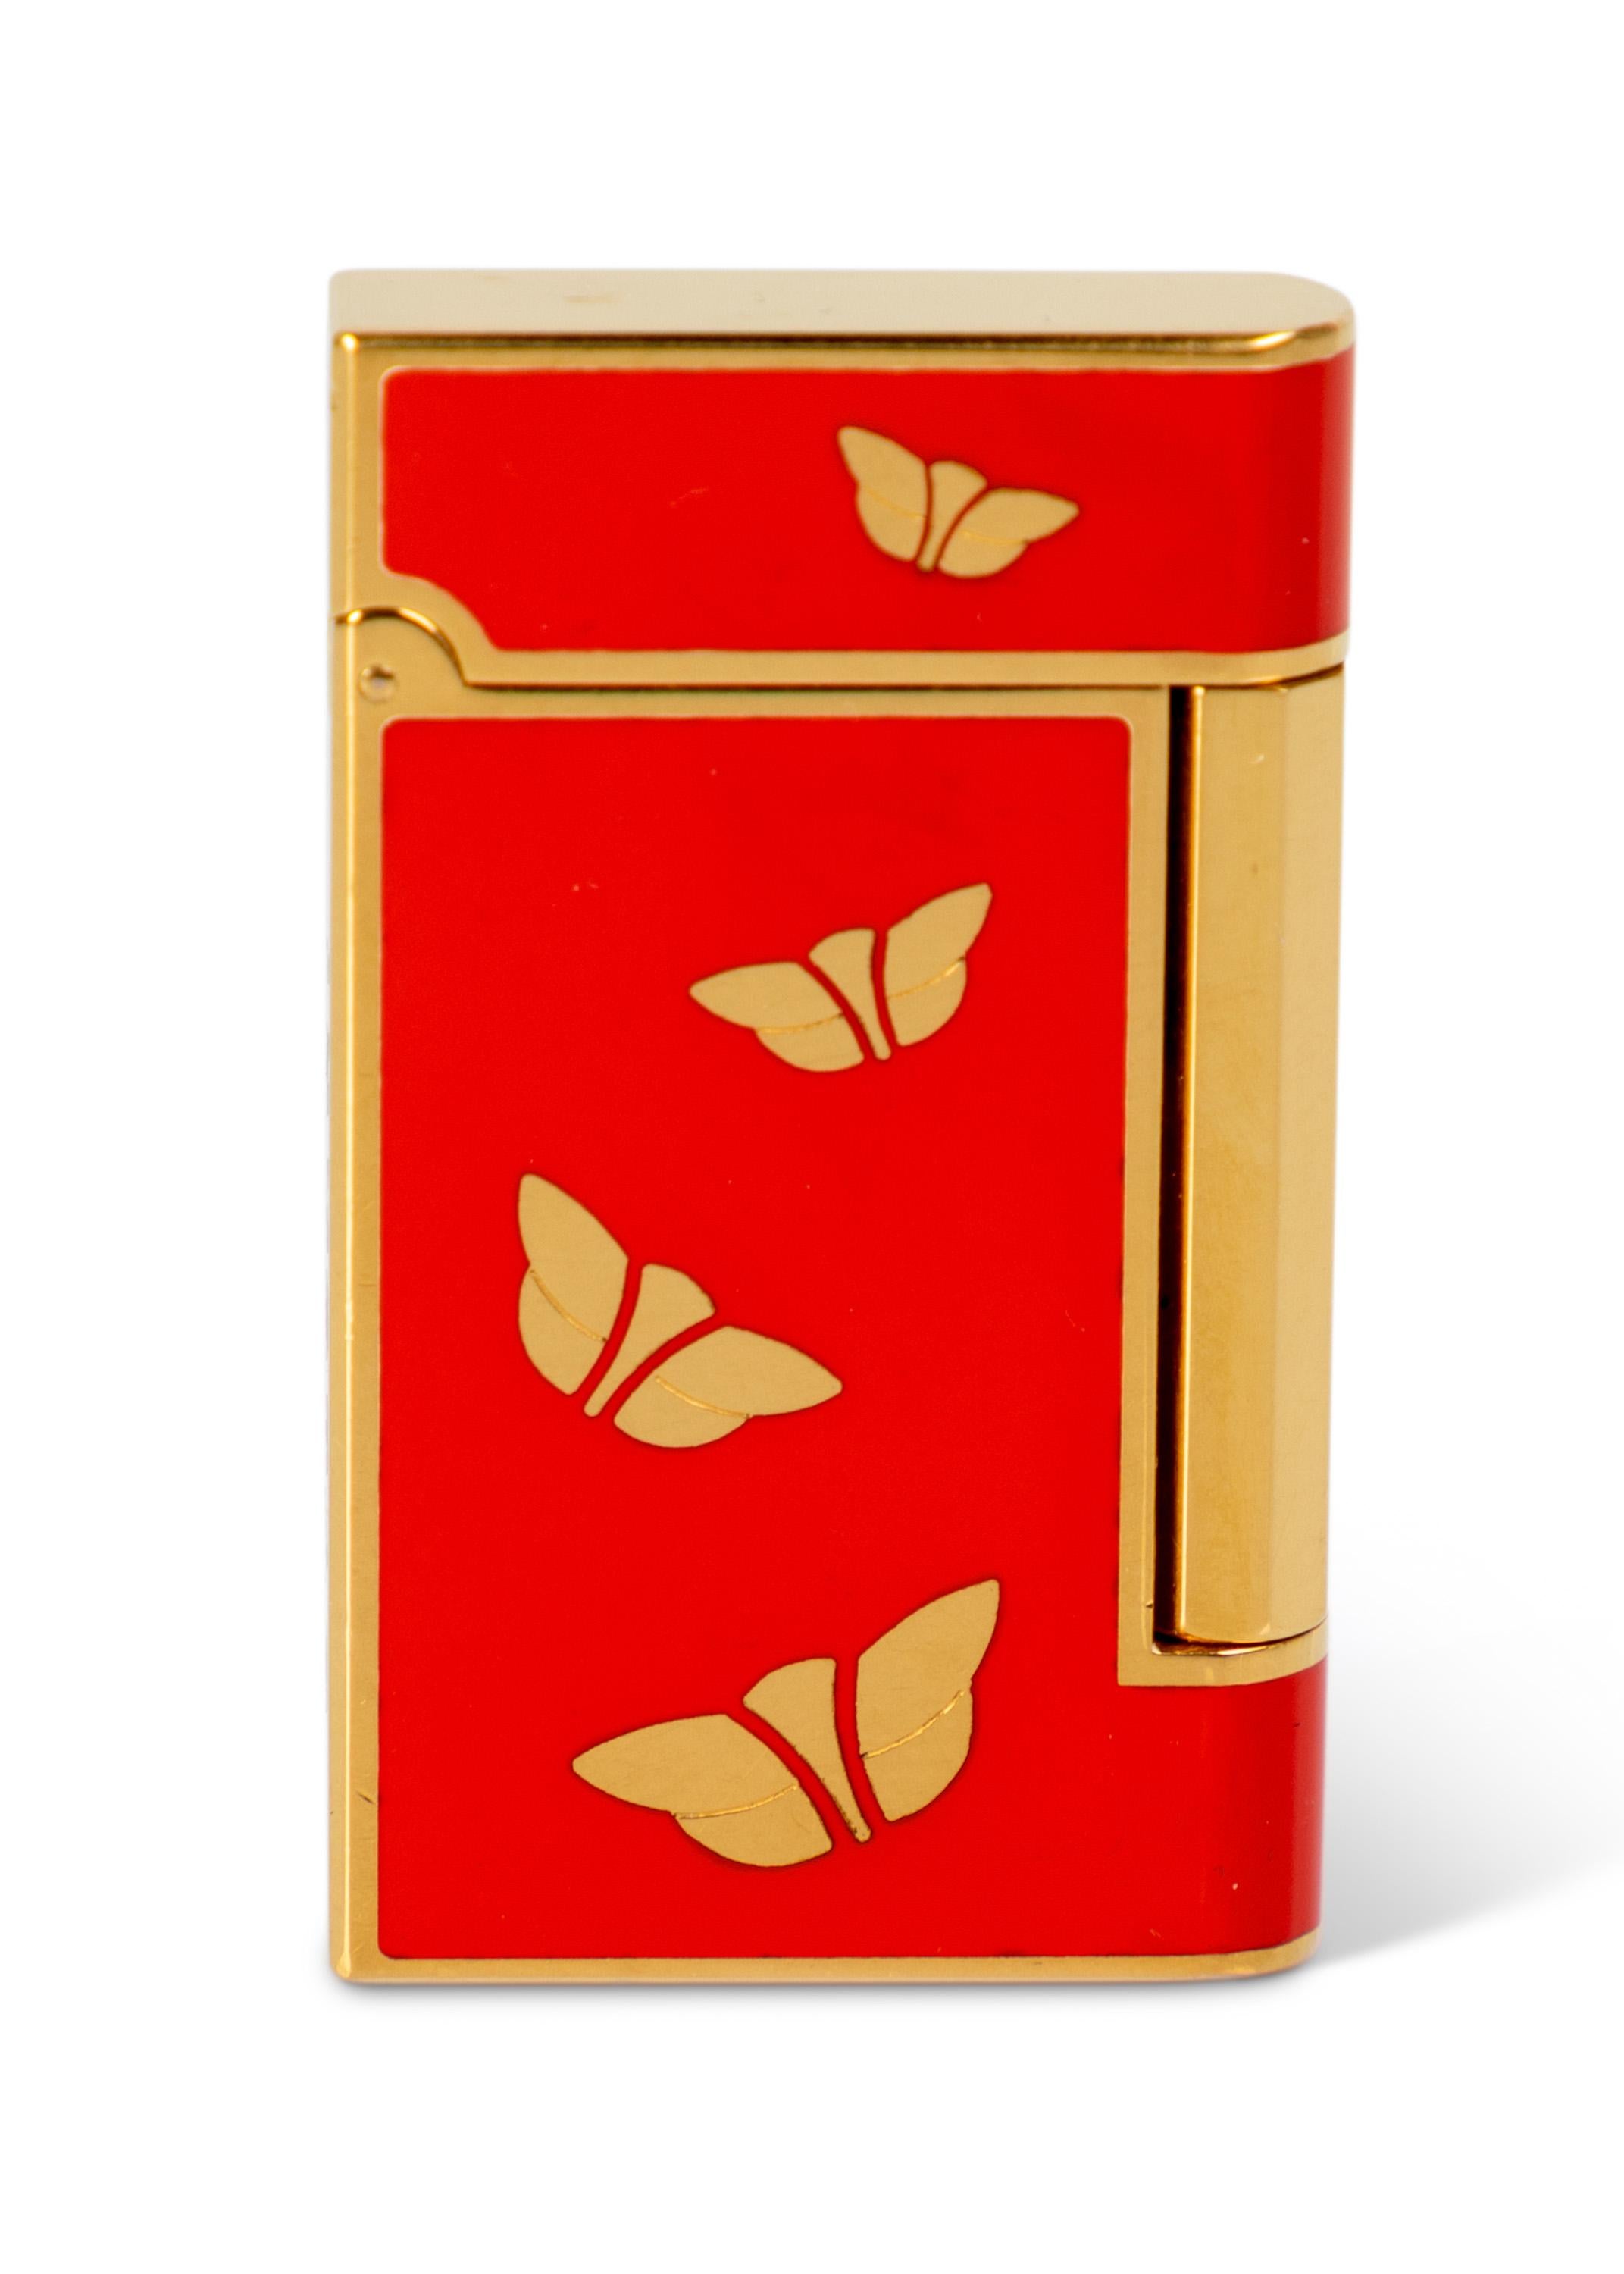 Bulgari is known to be at the pinnacle of luxury fragrances and accessories. An Italian based house with Greek roots, it is no wonder that Bulgari masterfully creates high quality metal goods. A late 1960s/ early 1970s piece, this lighter boasts a